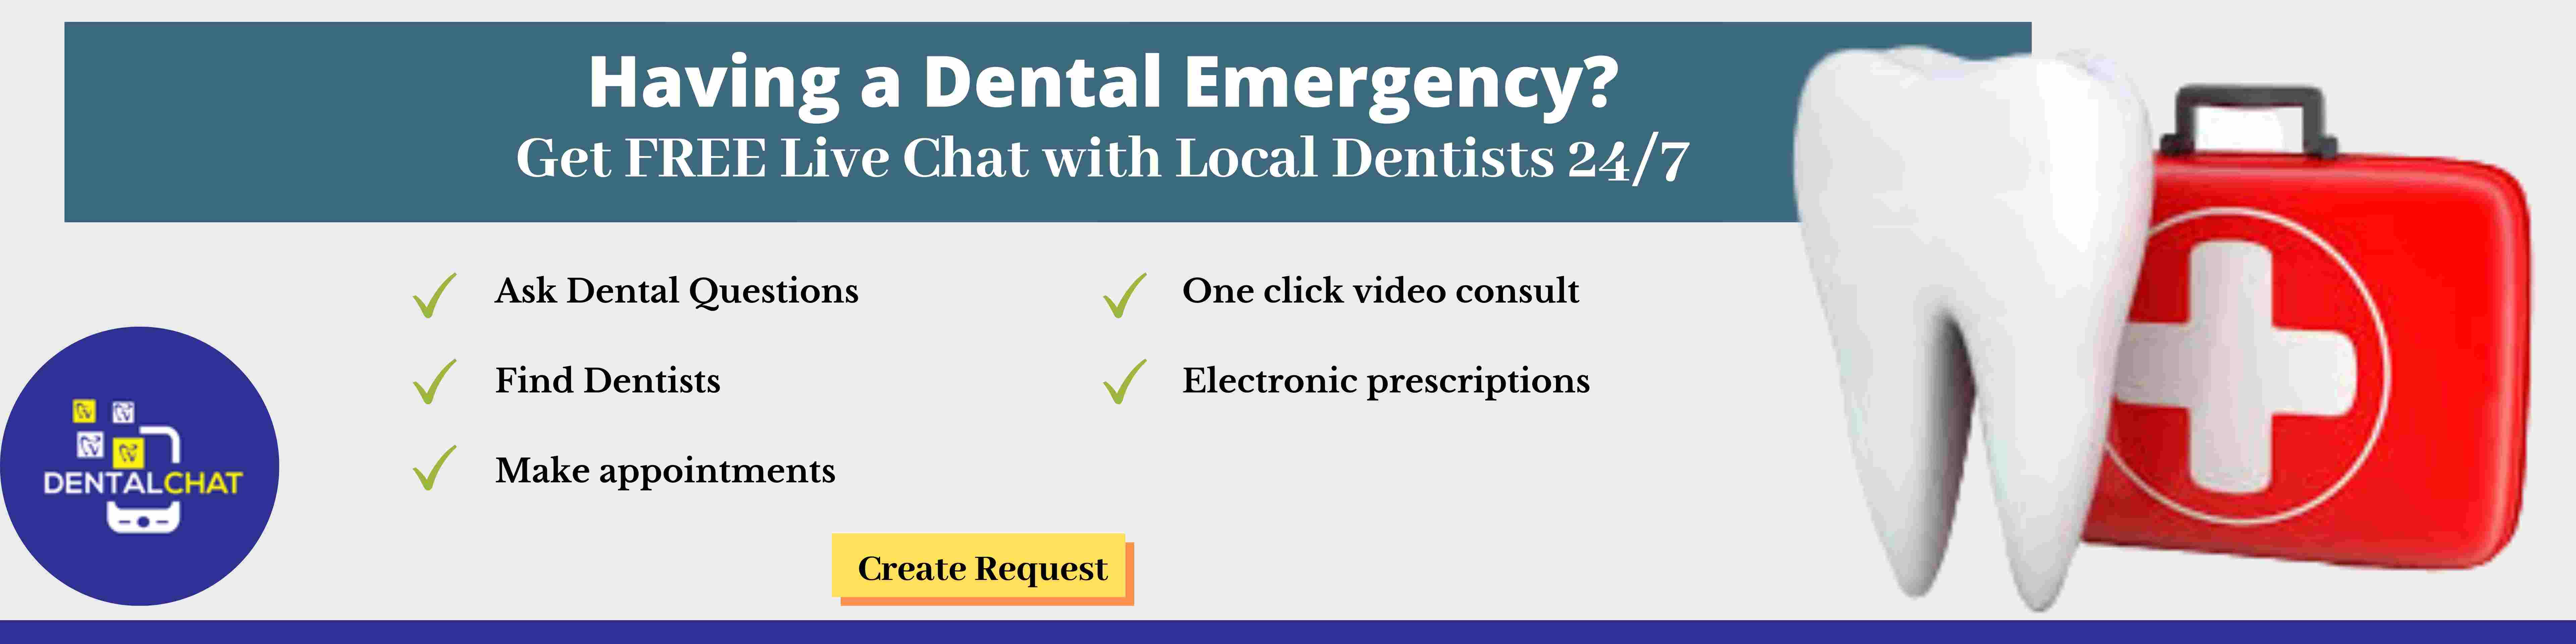 Local Urgent Dental Question Chat, Emergency Dentist Questions, Online Tooth Pain Teledentistry Consult